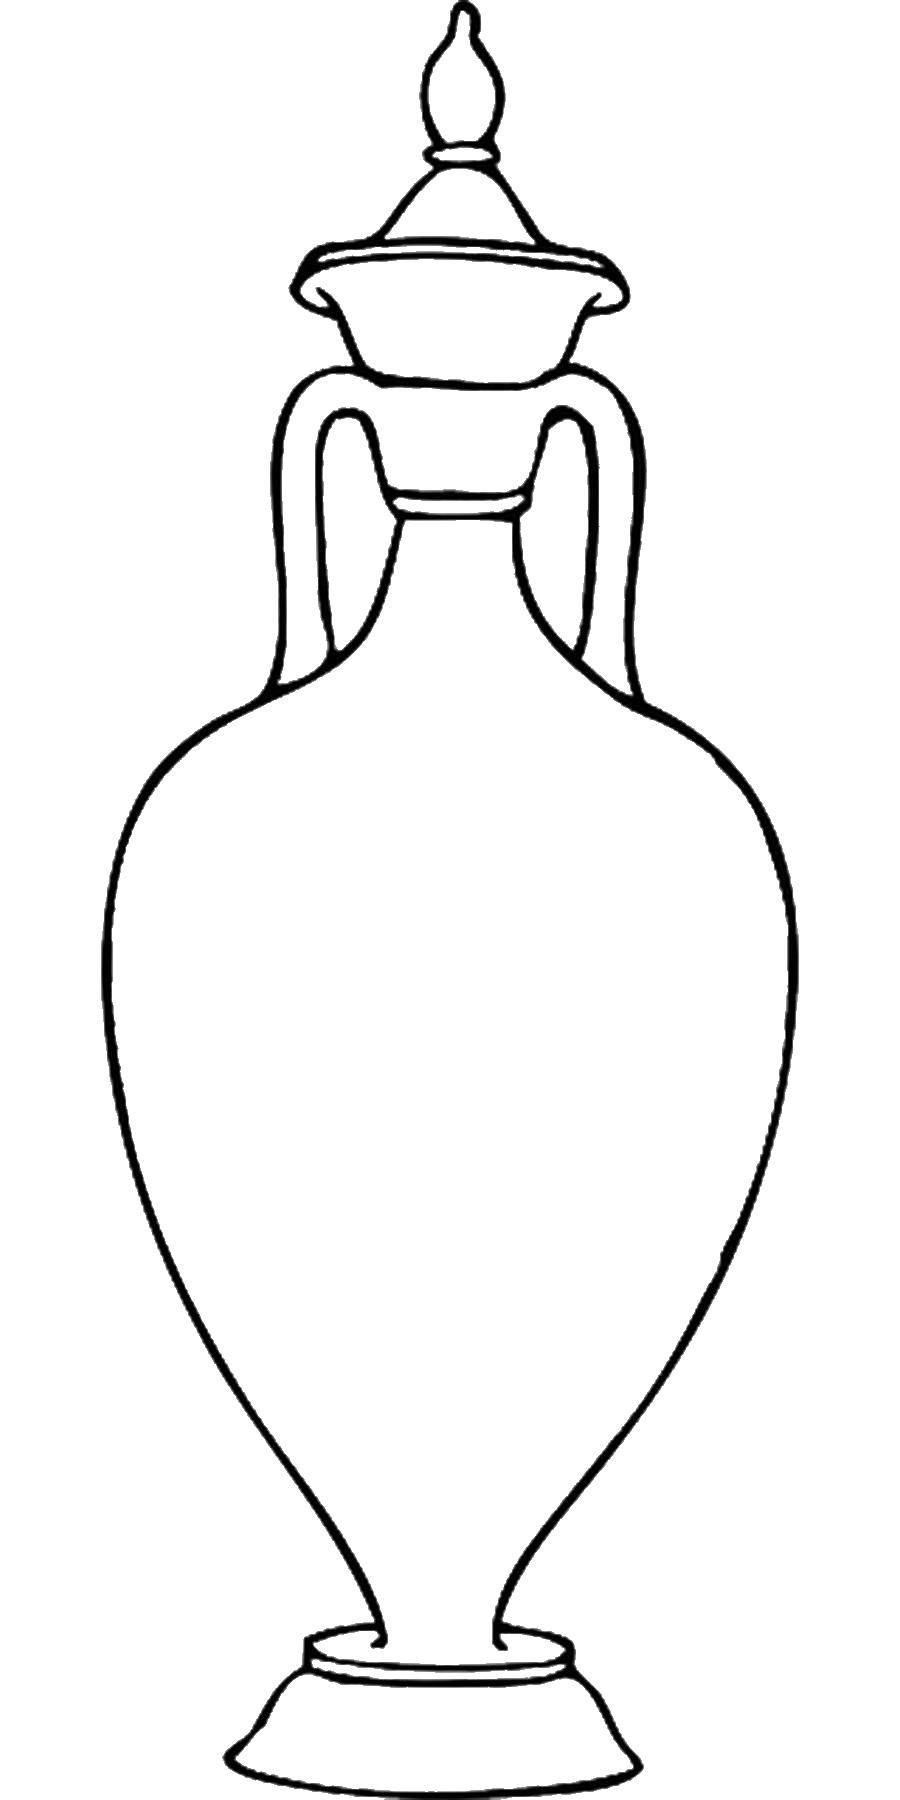 Coloring Pitcher. Category coloring. Tags:  jug.